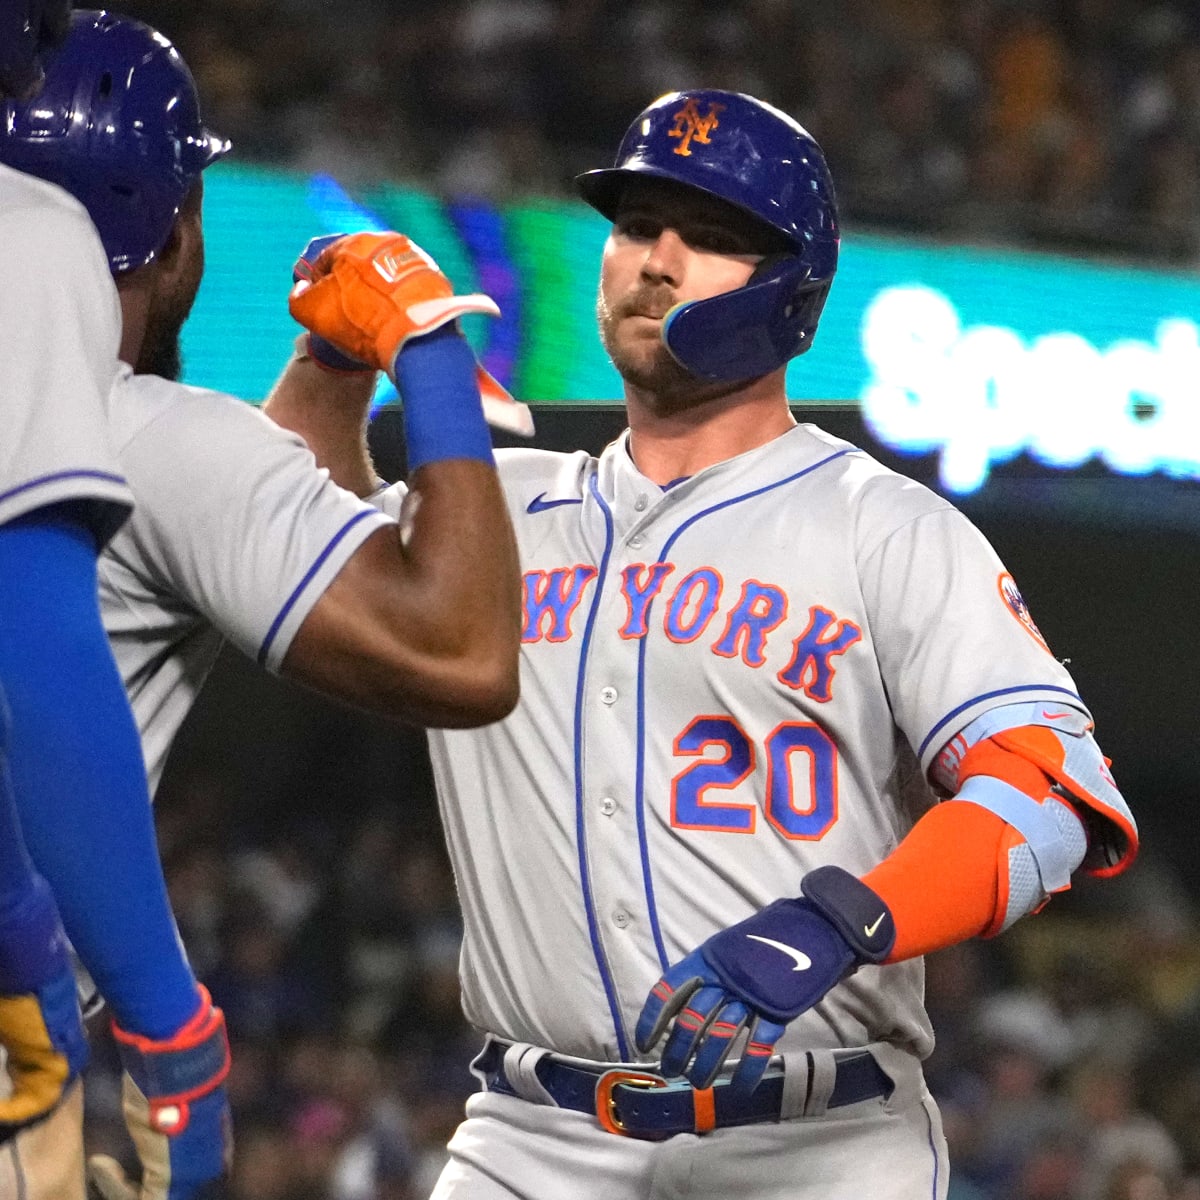 Pete Alonso Season Stats, 10-Game and Opposing Pitcher Stats